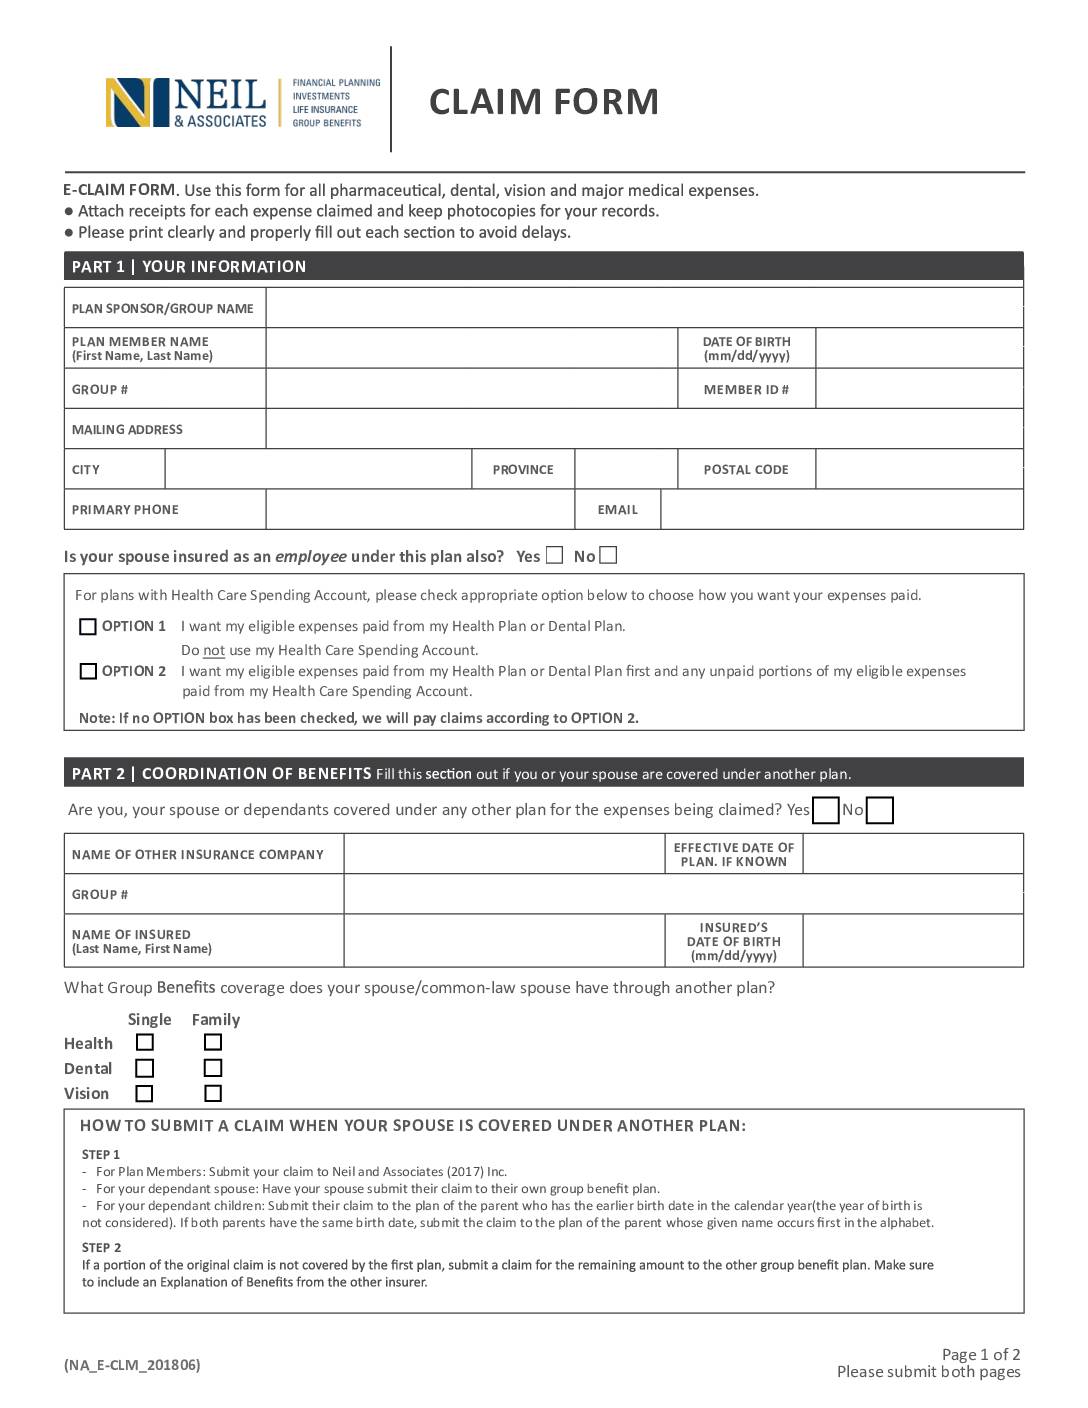 Canadian Benefit Providers Health and Dental Claim Form